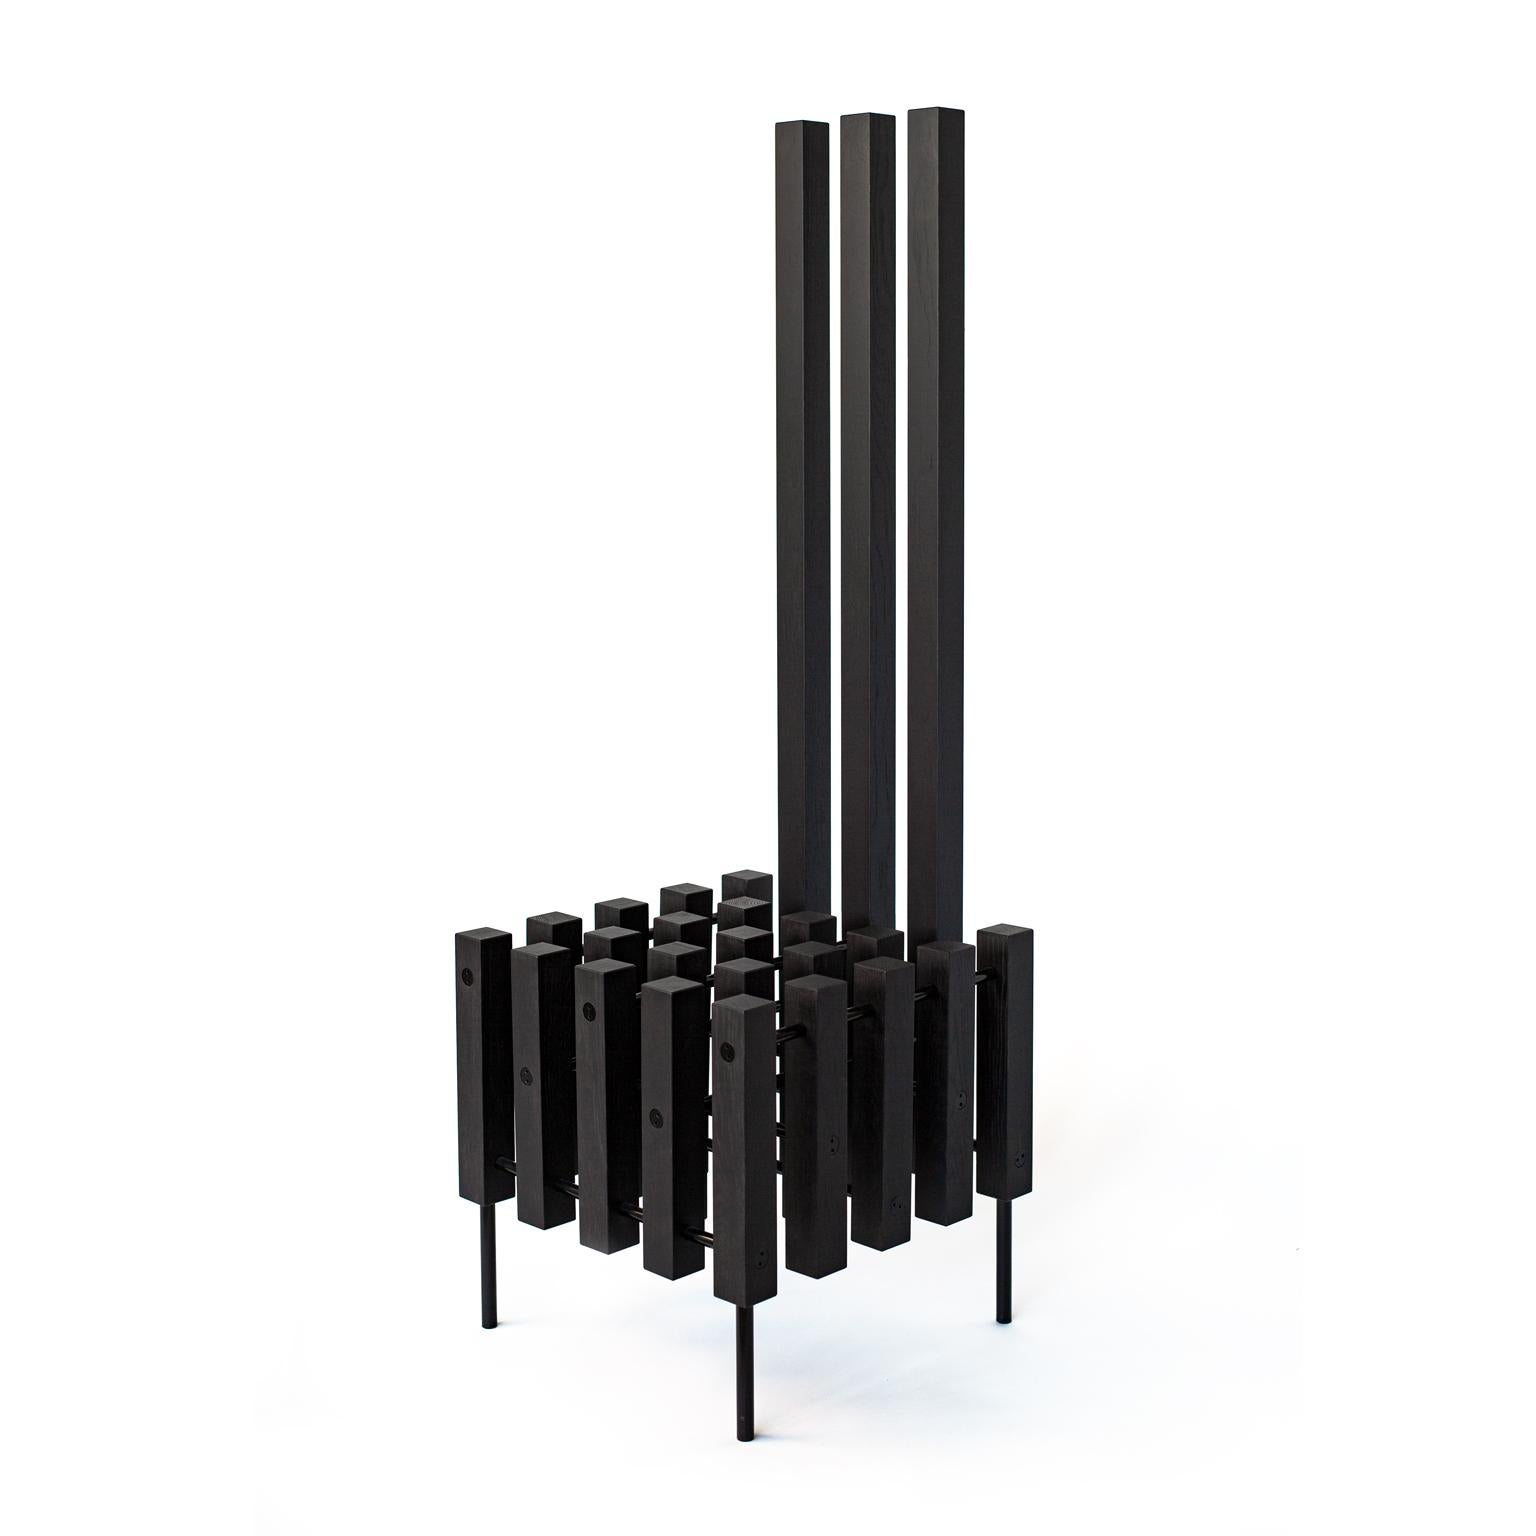 The Object Chair Matrix is  wood  hand made chair  in geometrical form, with  black metal details.
It is a form of an experience the comer makes individually.
Is it a chair? Is it a sculpture? Is it an art object? Or is it maybe the  Chair Matrix